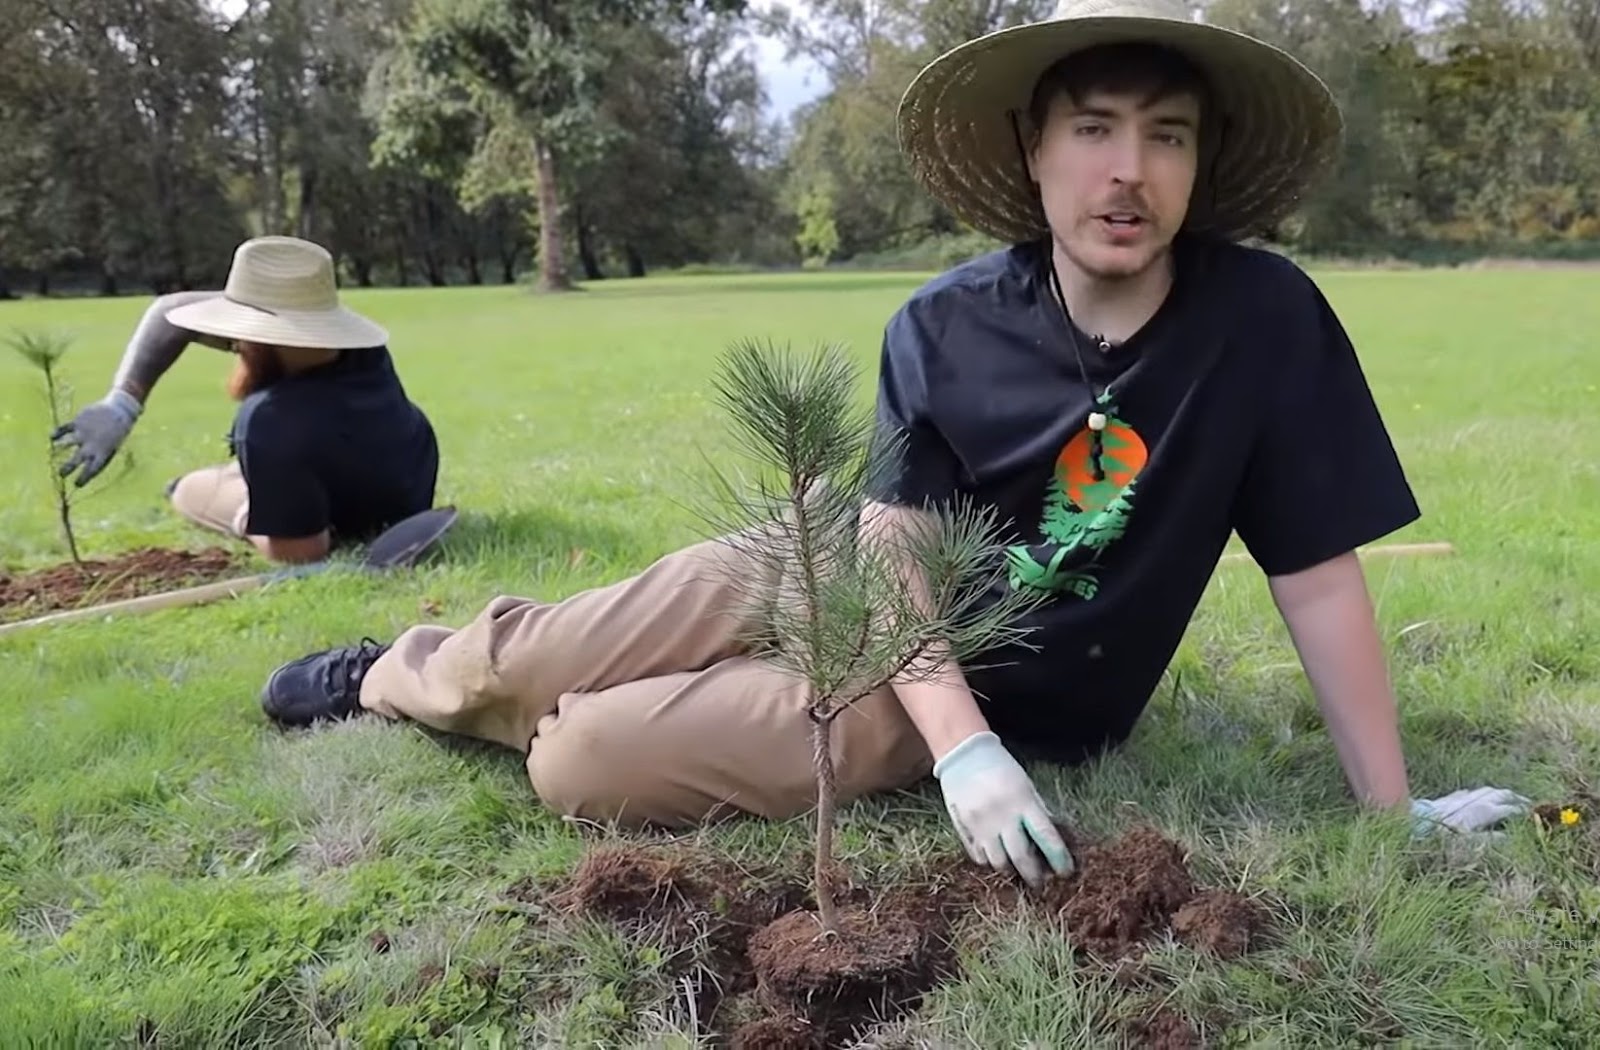 Mr Beast Planting Trees: The Real Reasons Exposed!